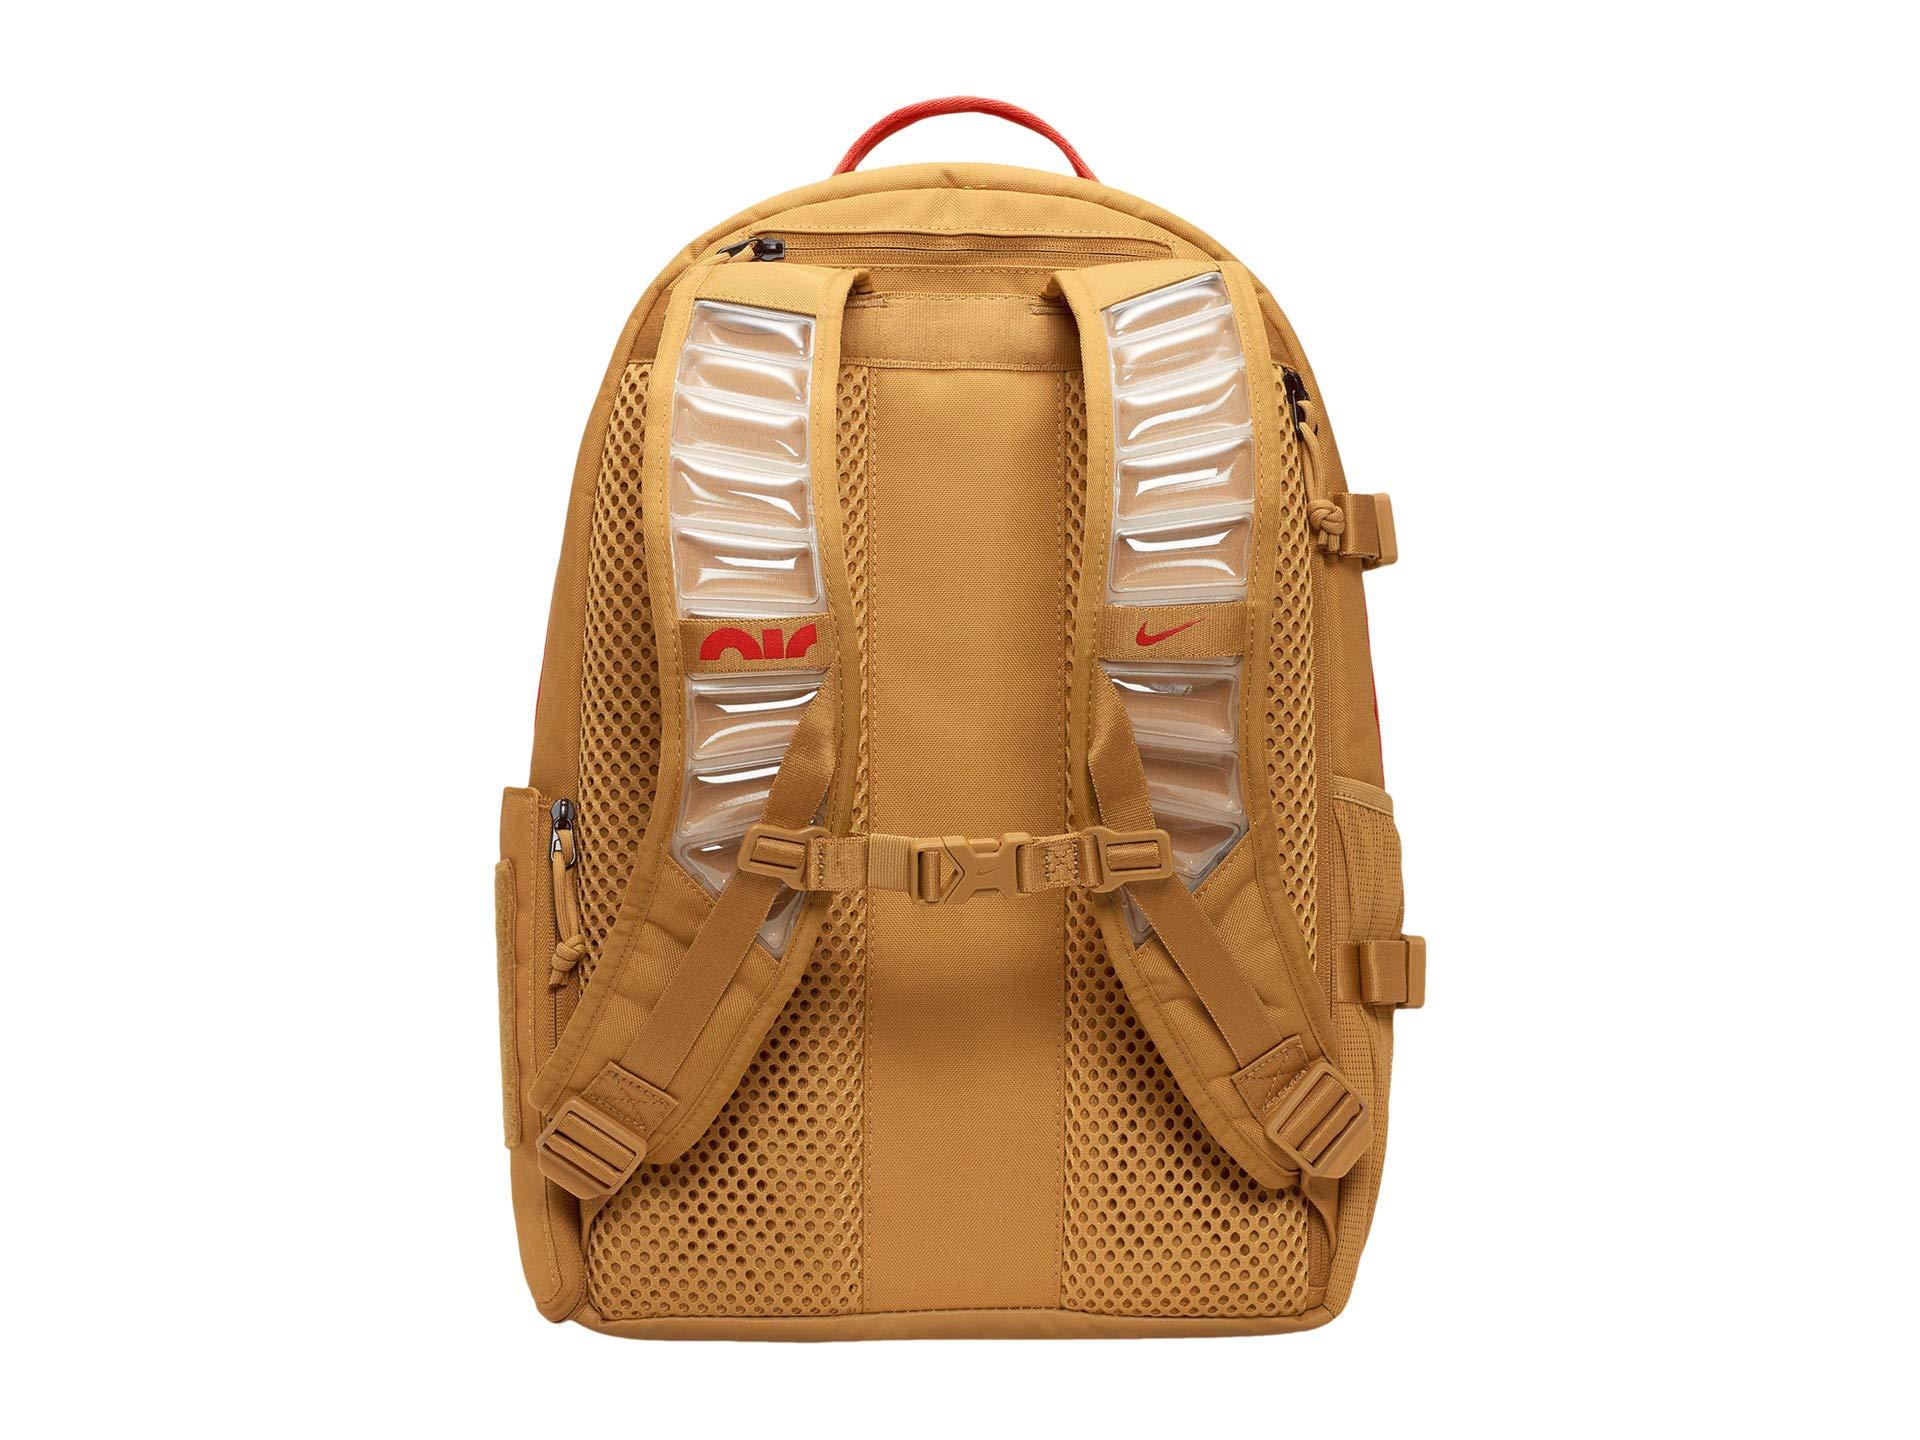 Nike Synthetic Utility Power Backpack in Tan (Brown) - Lyst